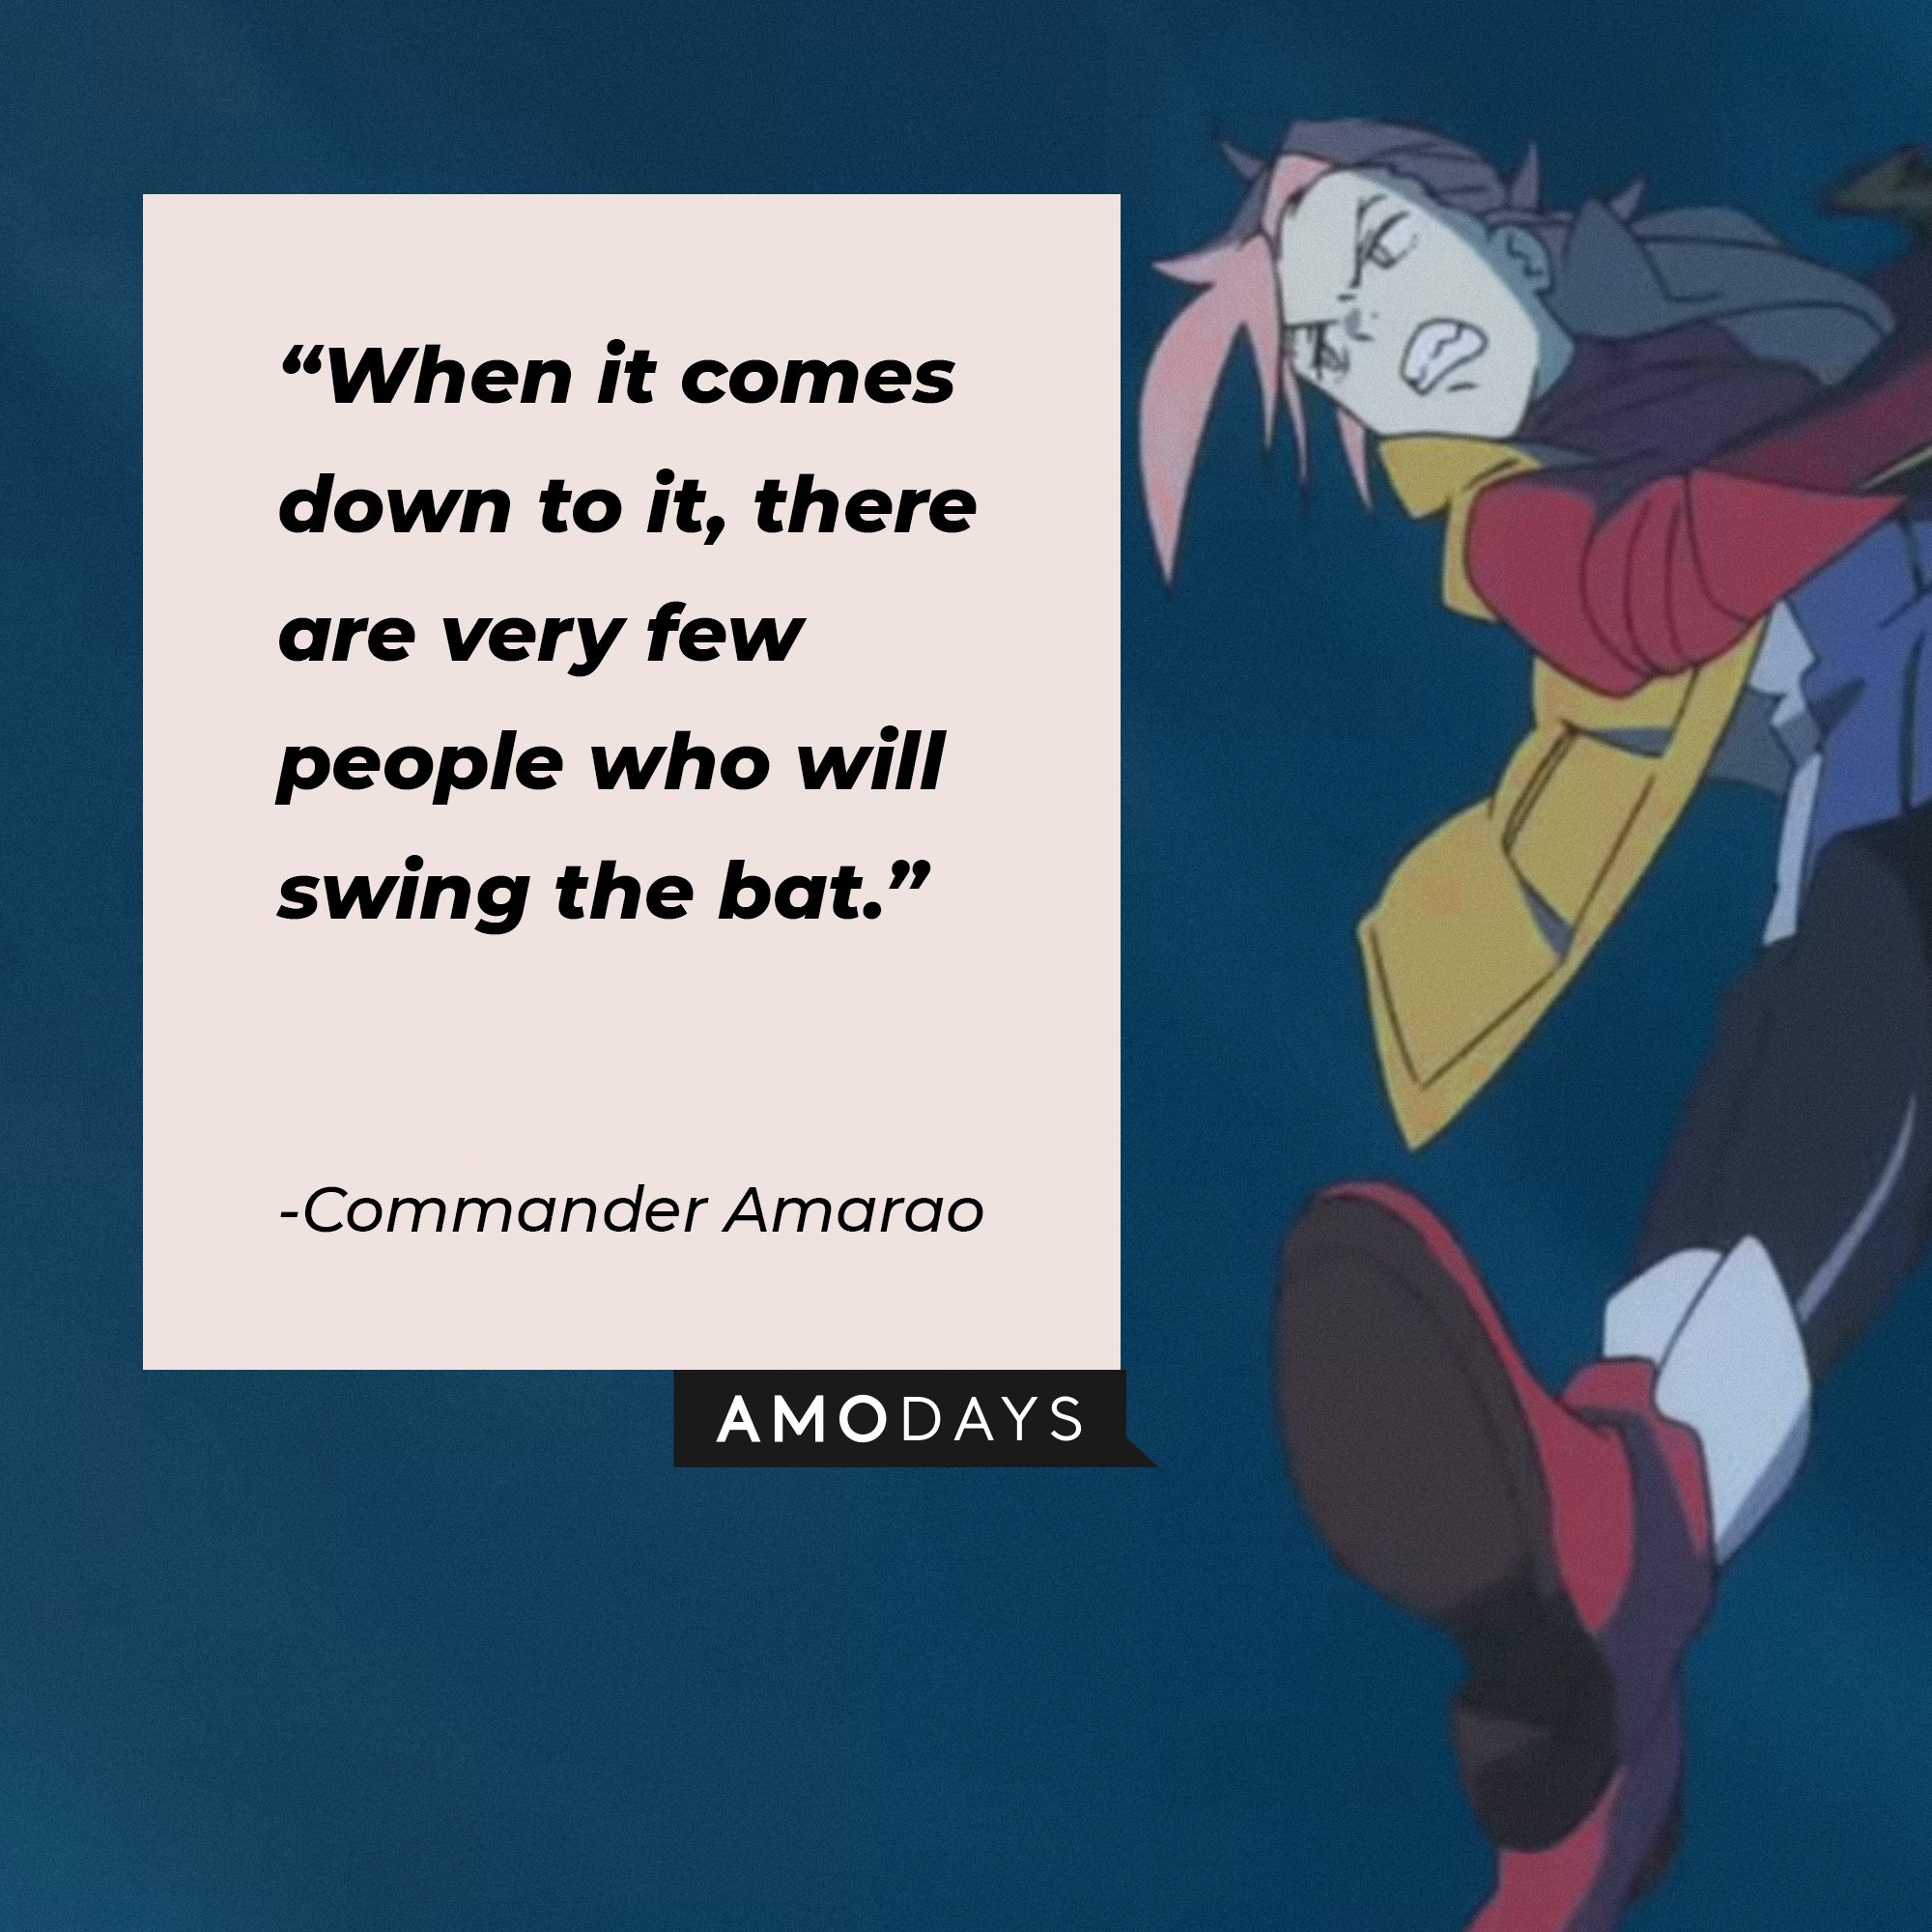 Commander Amarao’s quotes: “When it comes down to it, there are very few people who will swing the bat.” | Image: AmoDays